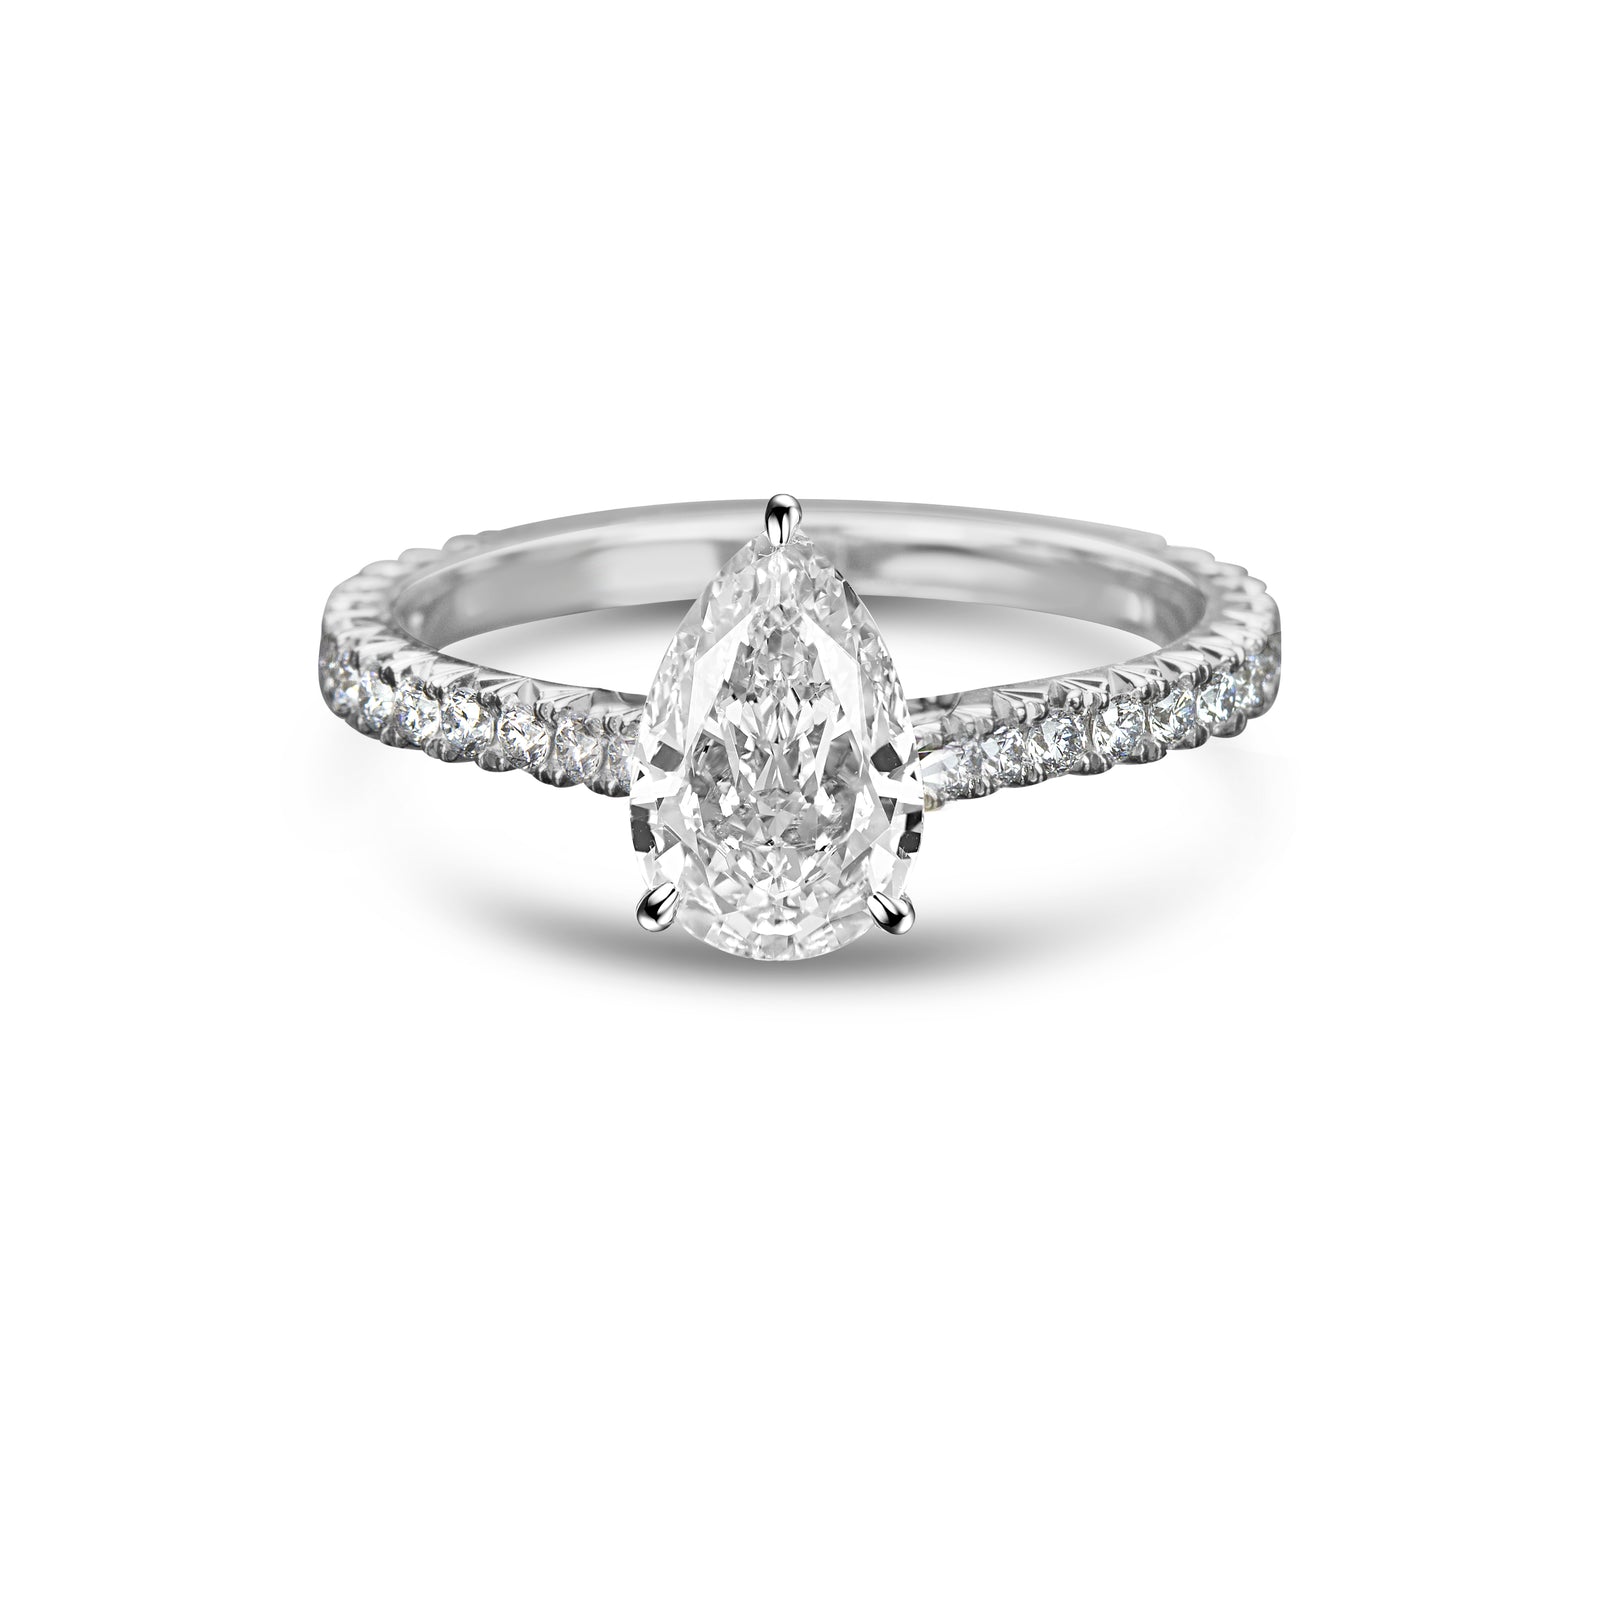 The Soleil Hidden Halo French Pave Solitaire